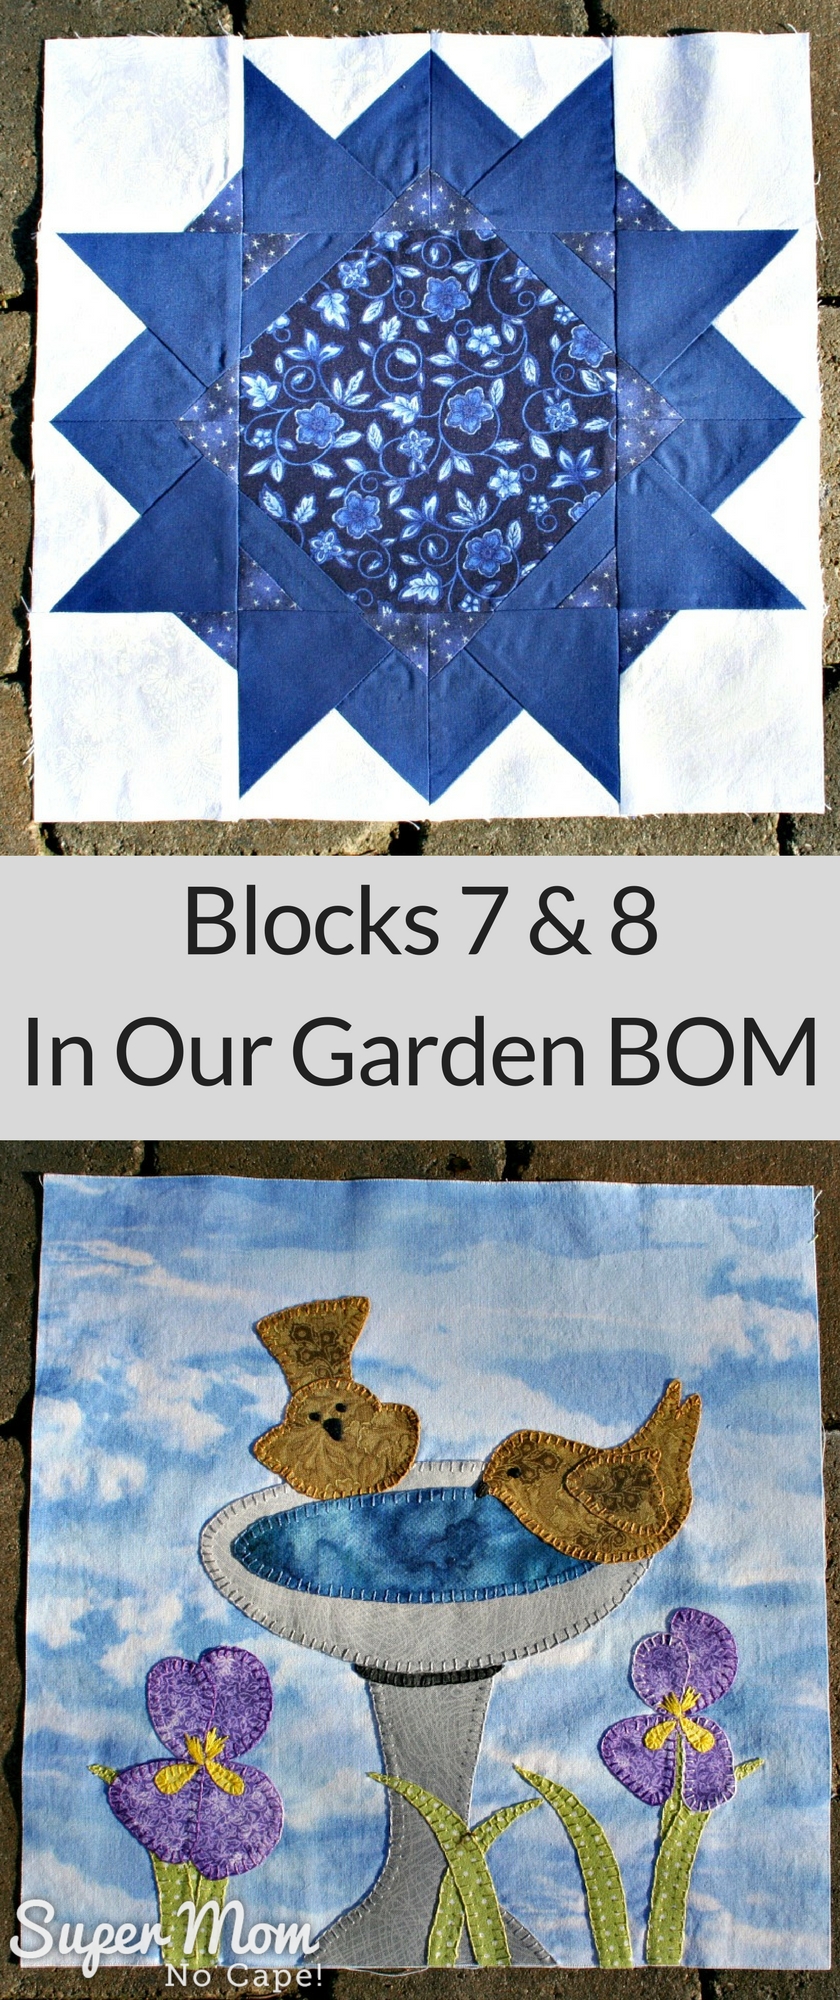 Super Mom - No Cape's versions of Blocks 7 and 8 In Our Garden BOM